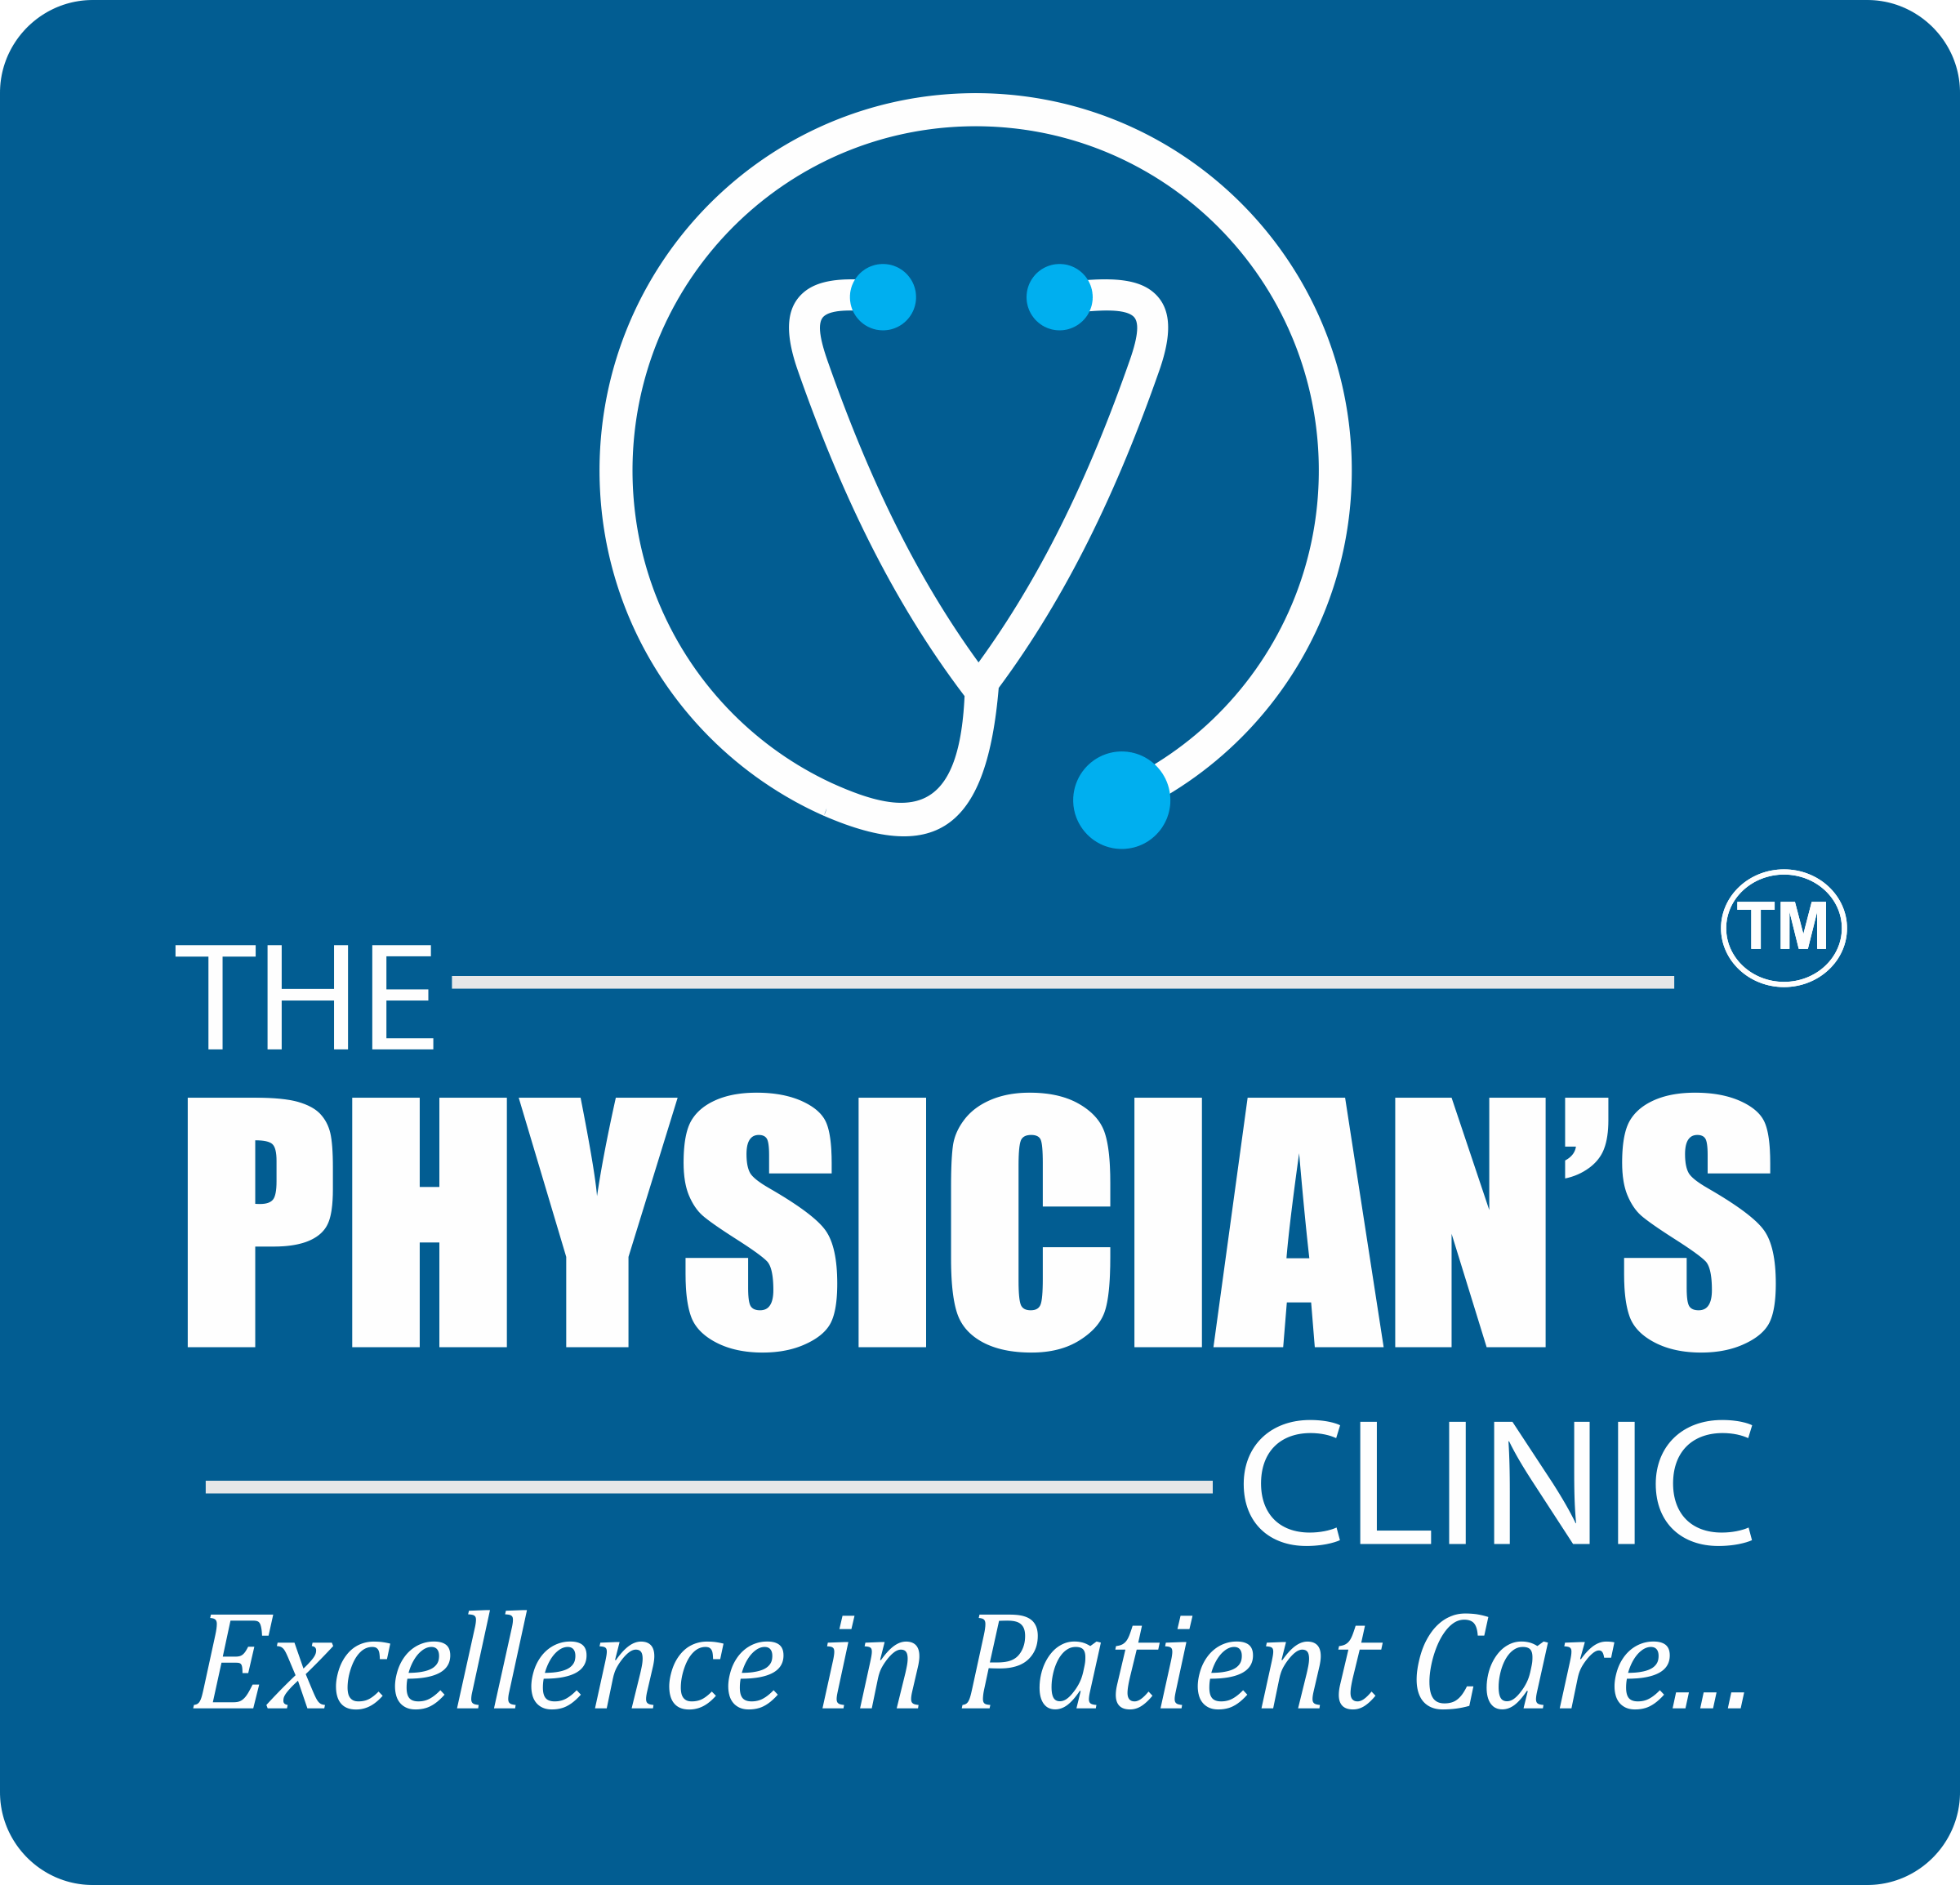 Blog - The Physicians Clinic